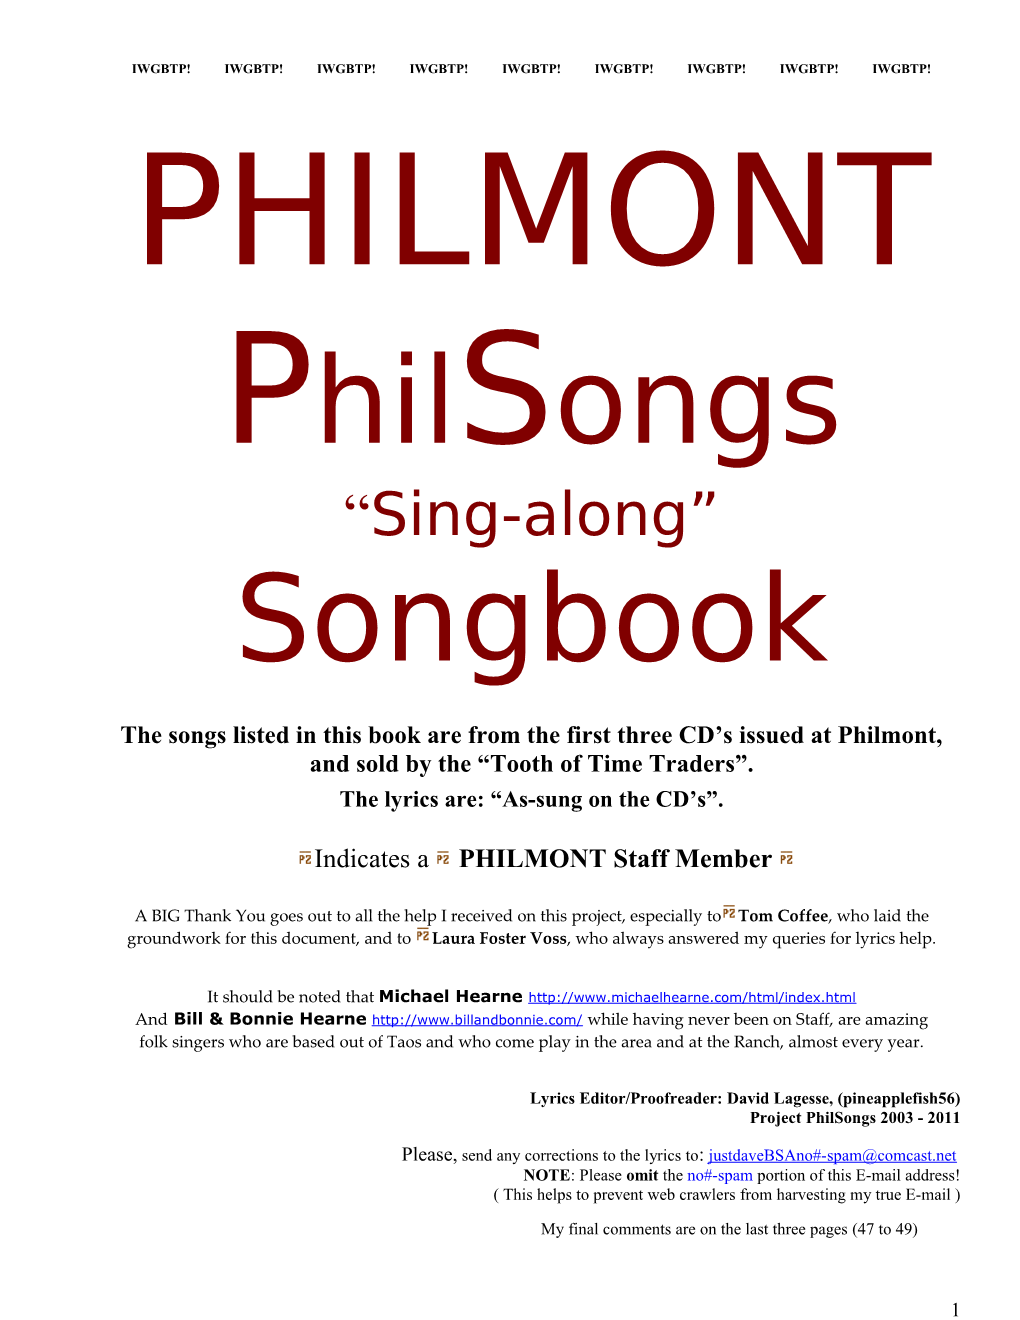 Philmont Philsongs Song Book